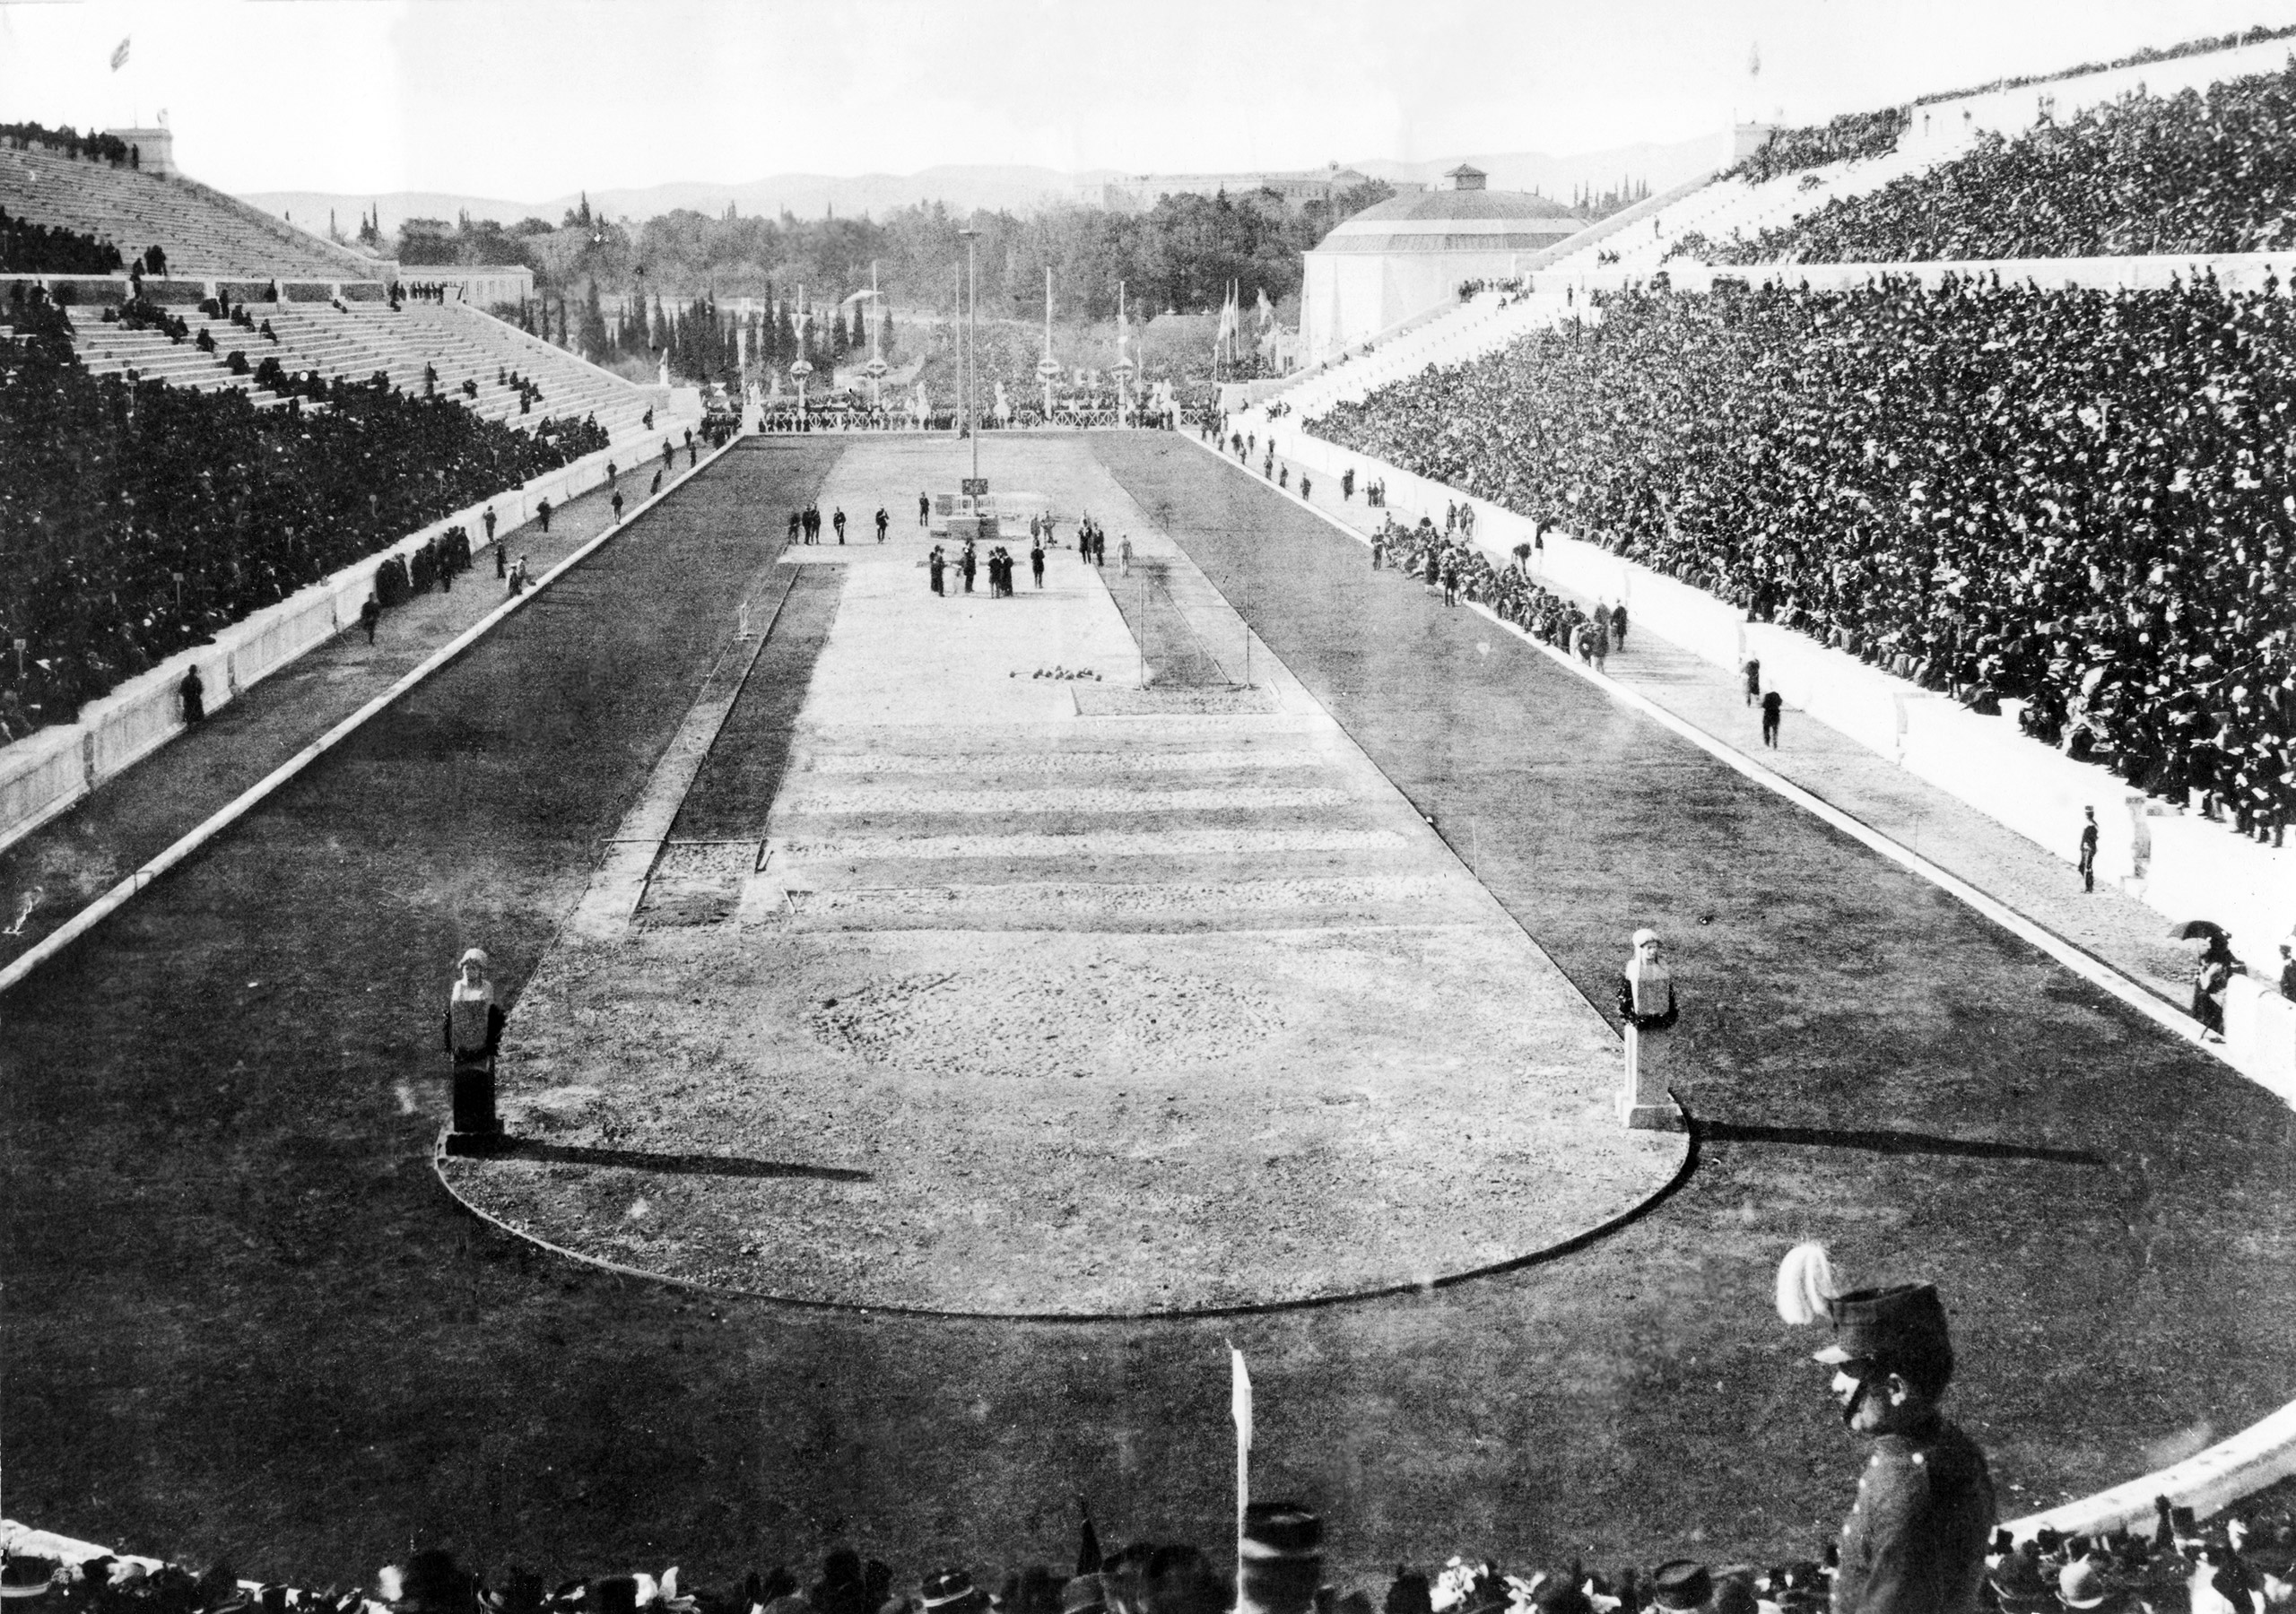 A general view of the Olympic stadium in Athens, Greece, in 1896.